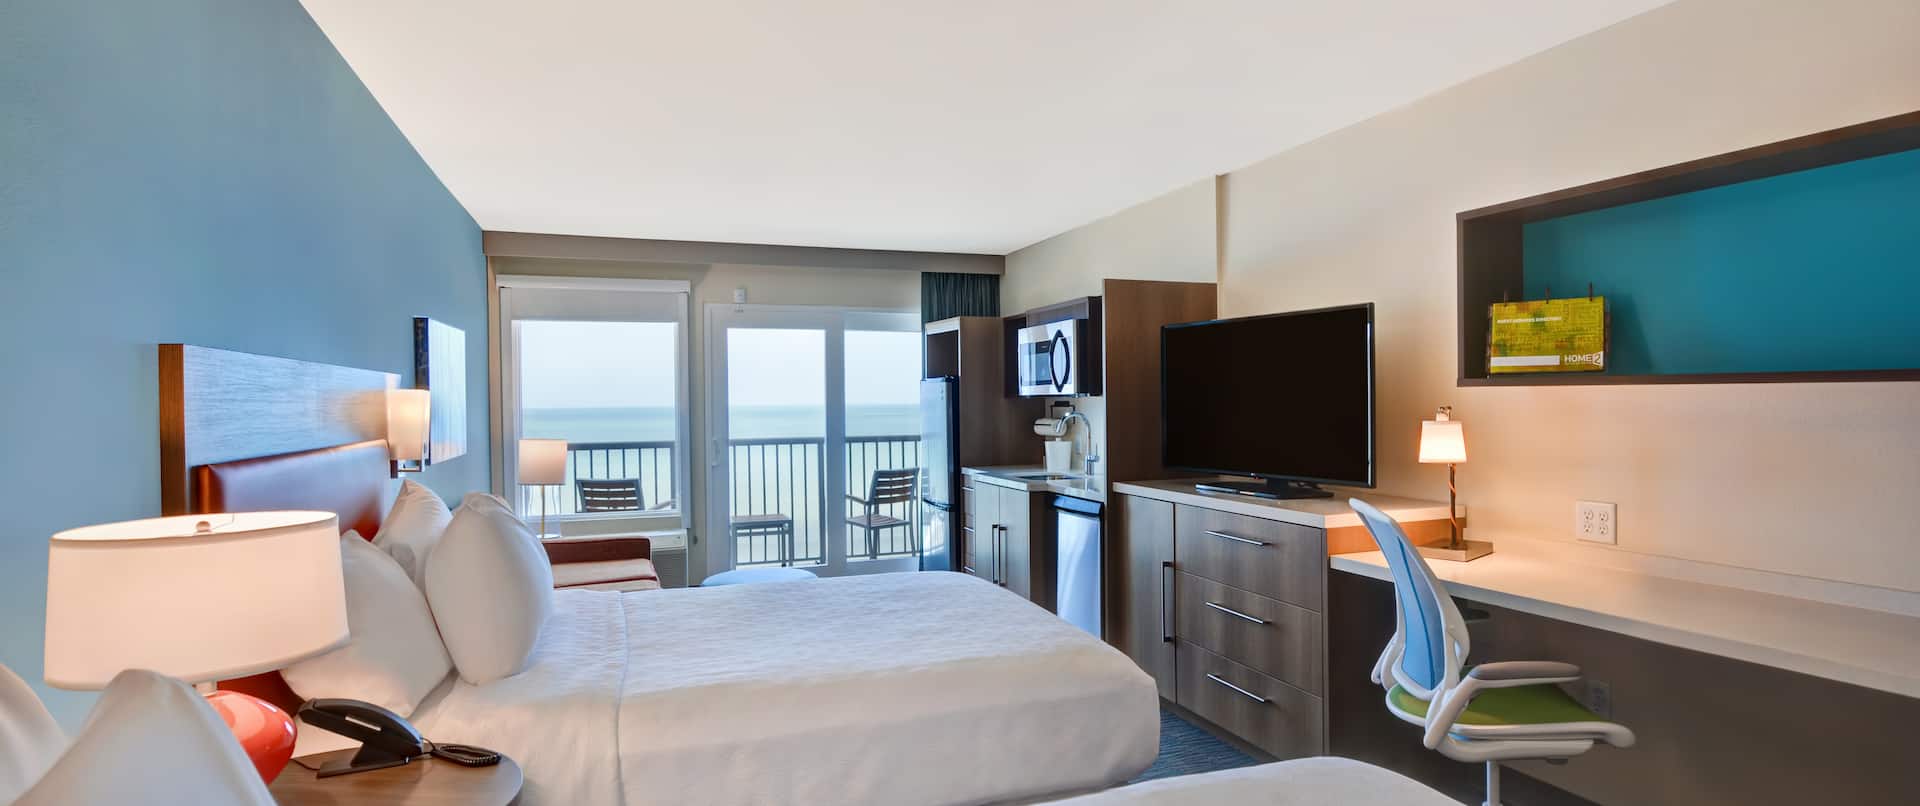 guest room with beds work desk and ocean view